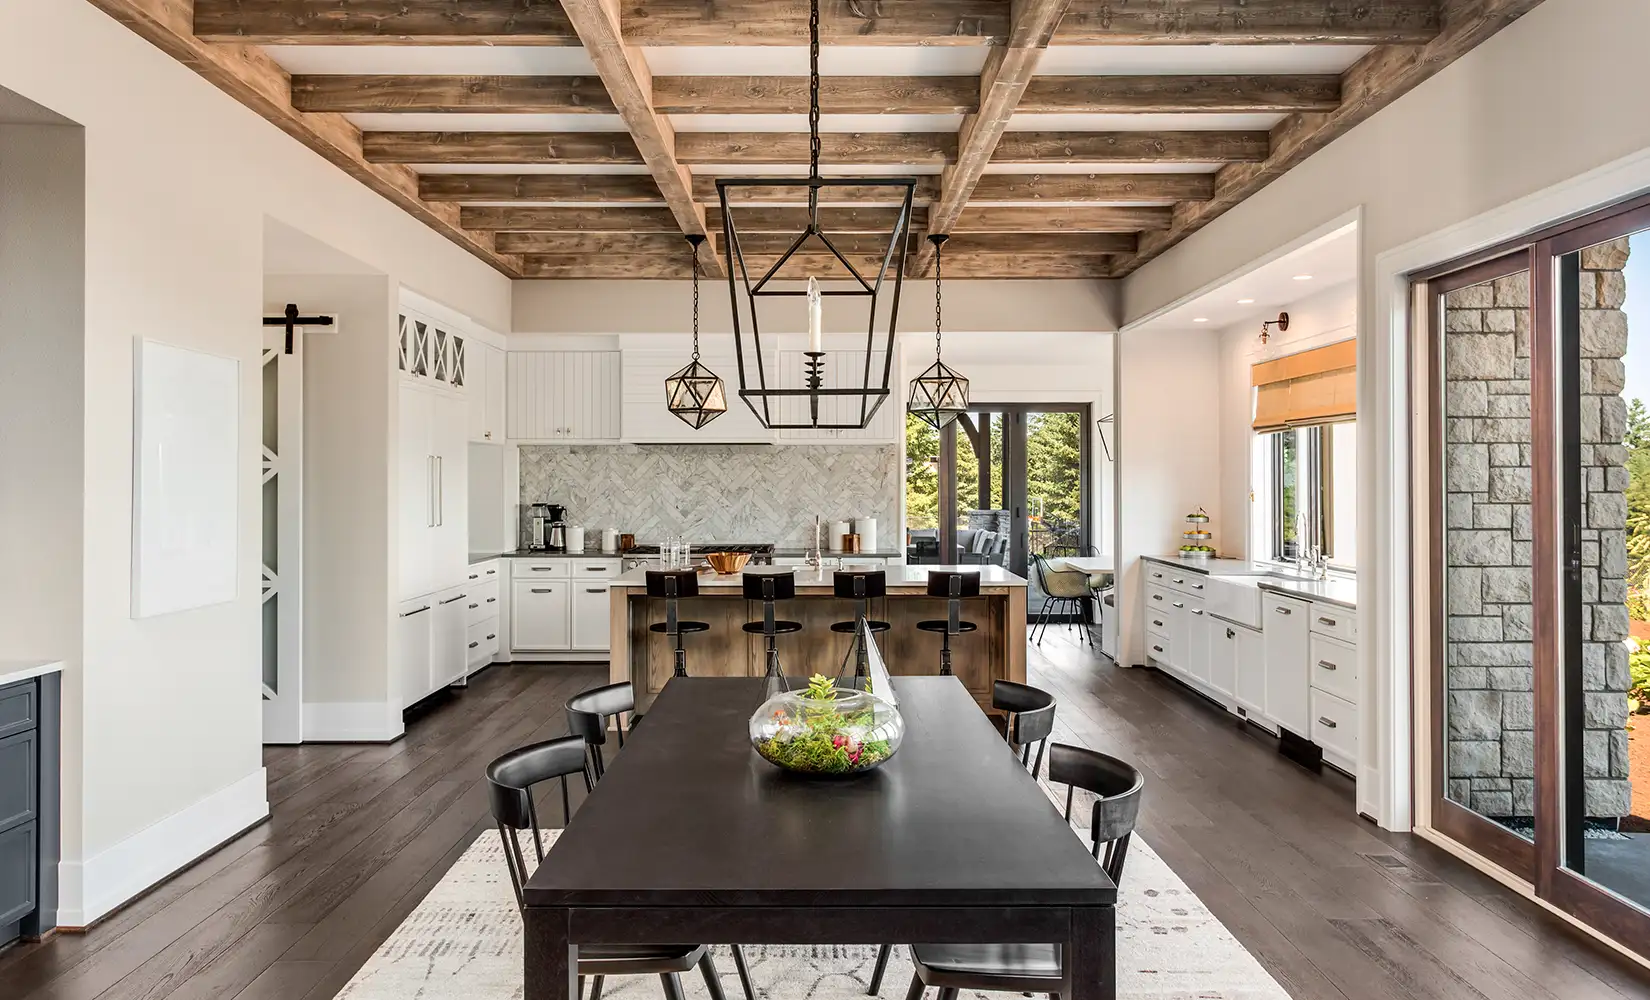 Industrial kitchen with wood ceiling beams, wood flooring, and wooden cabinets in a modern home setting.